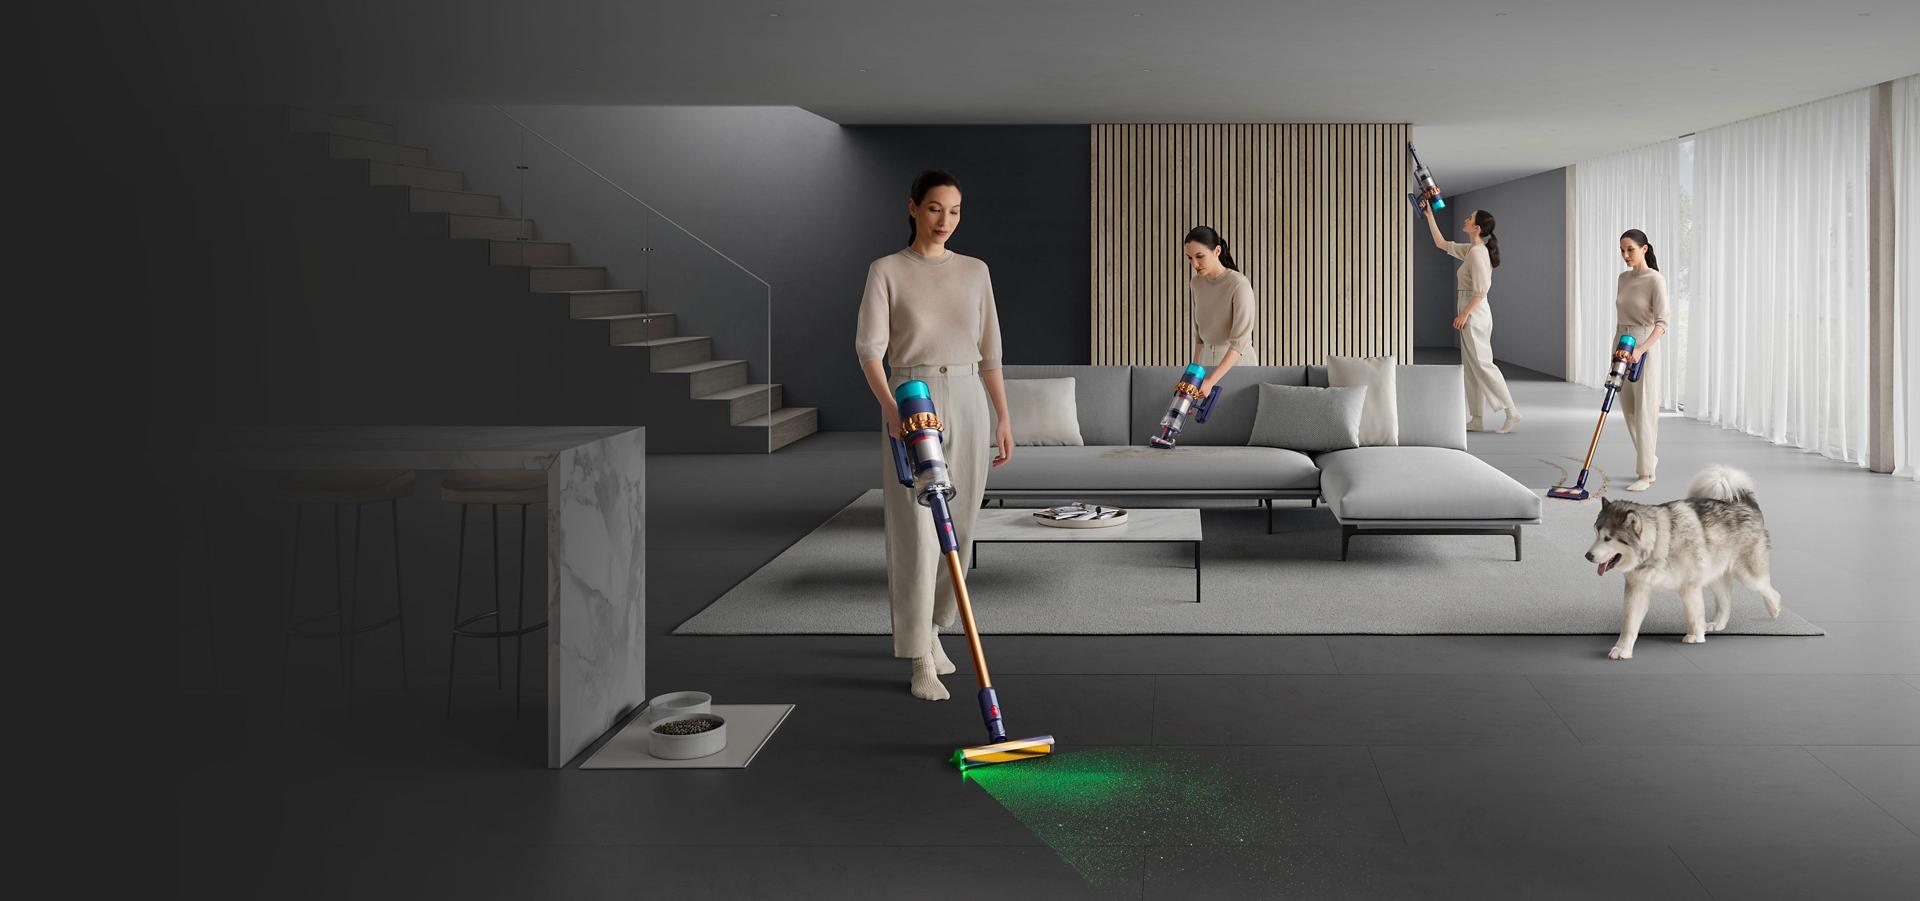 Woman cleaning all around room, up high, on sofa, carpet and hard floor.